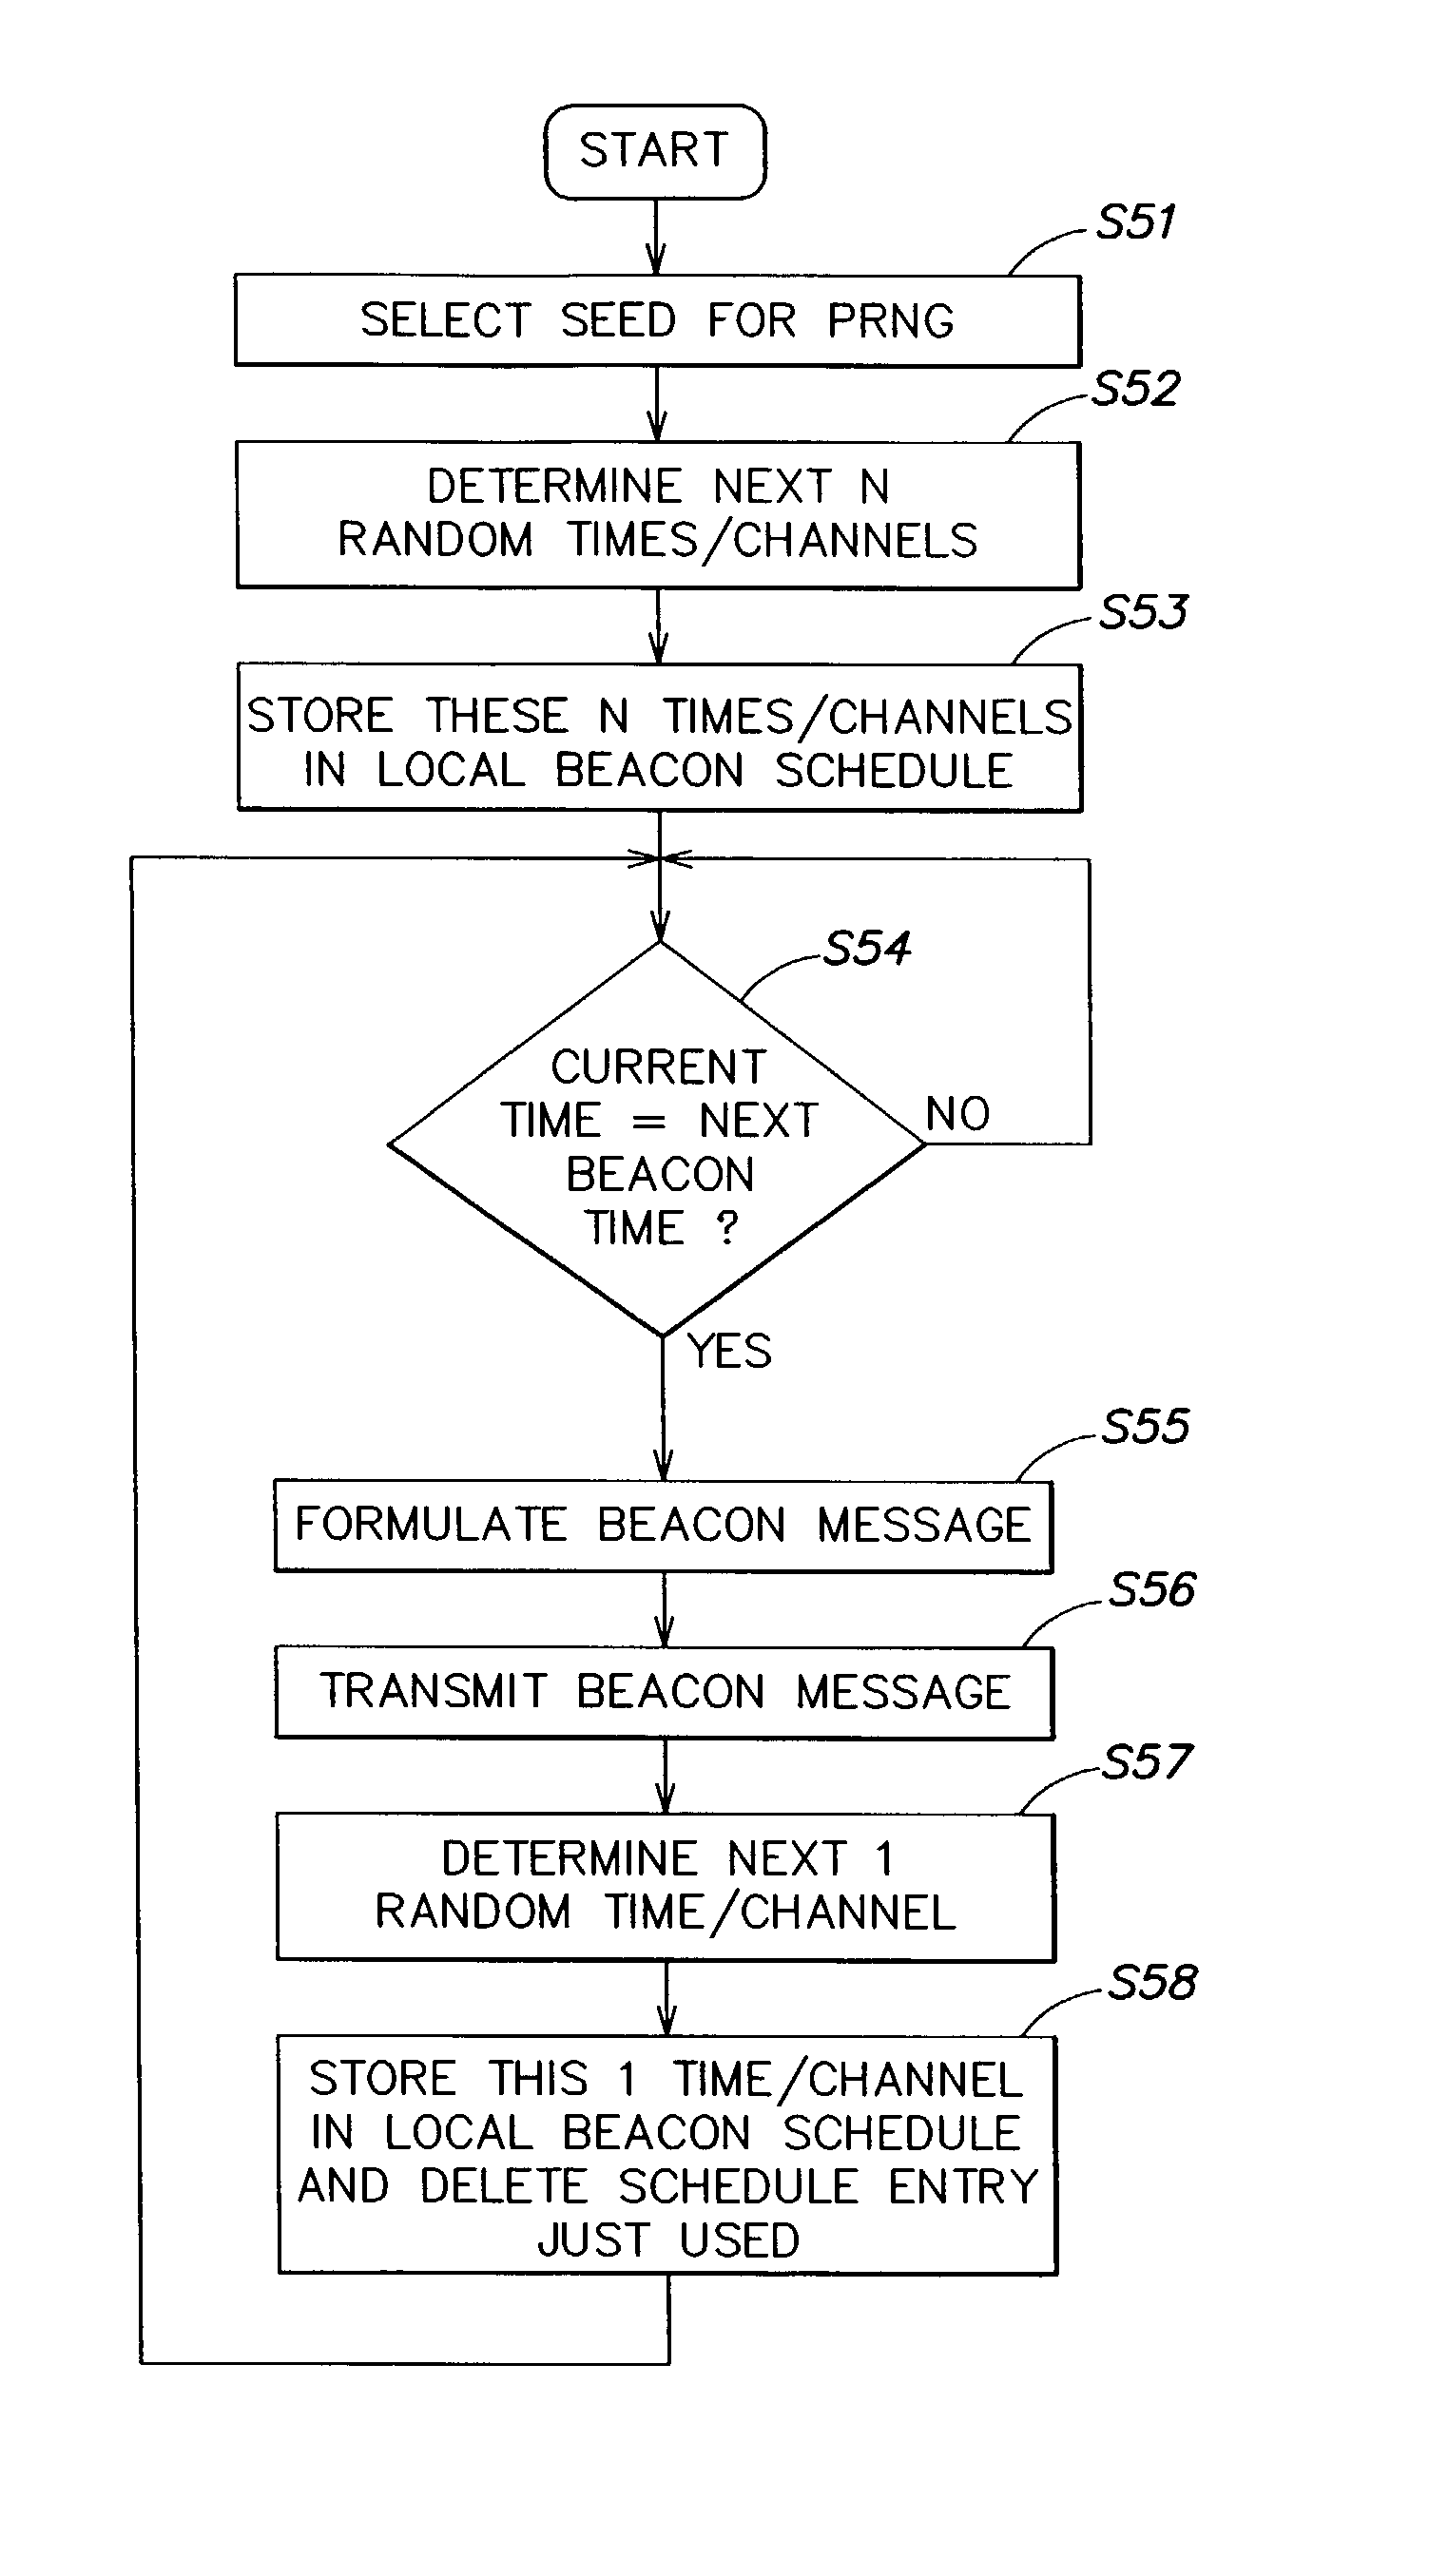 Method and apparatus for varying times/channels of broadcast beacons